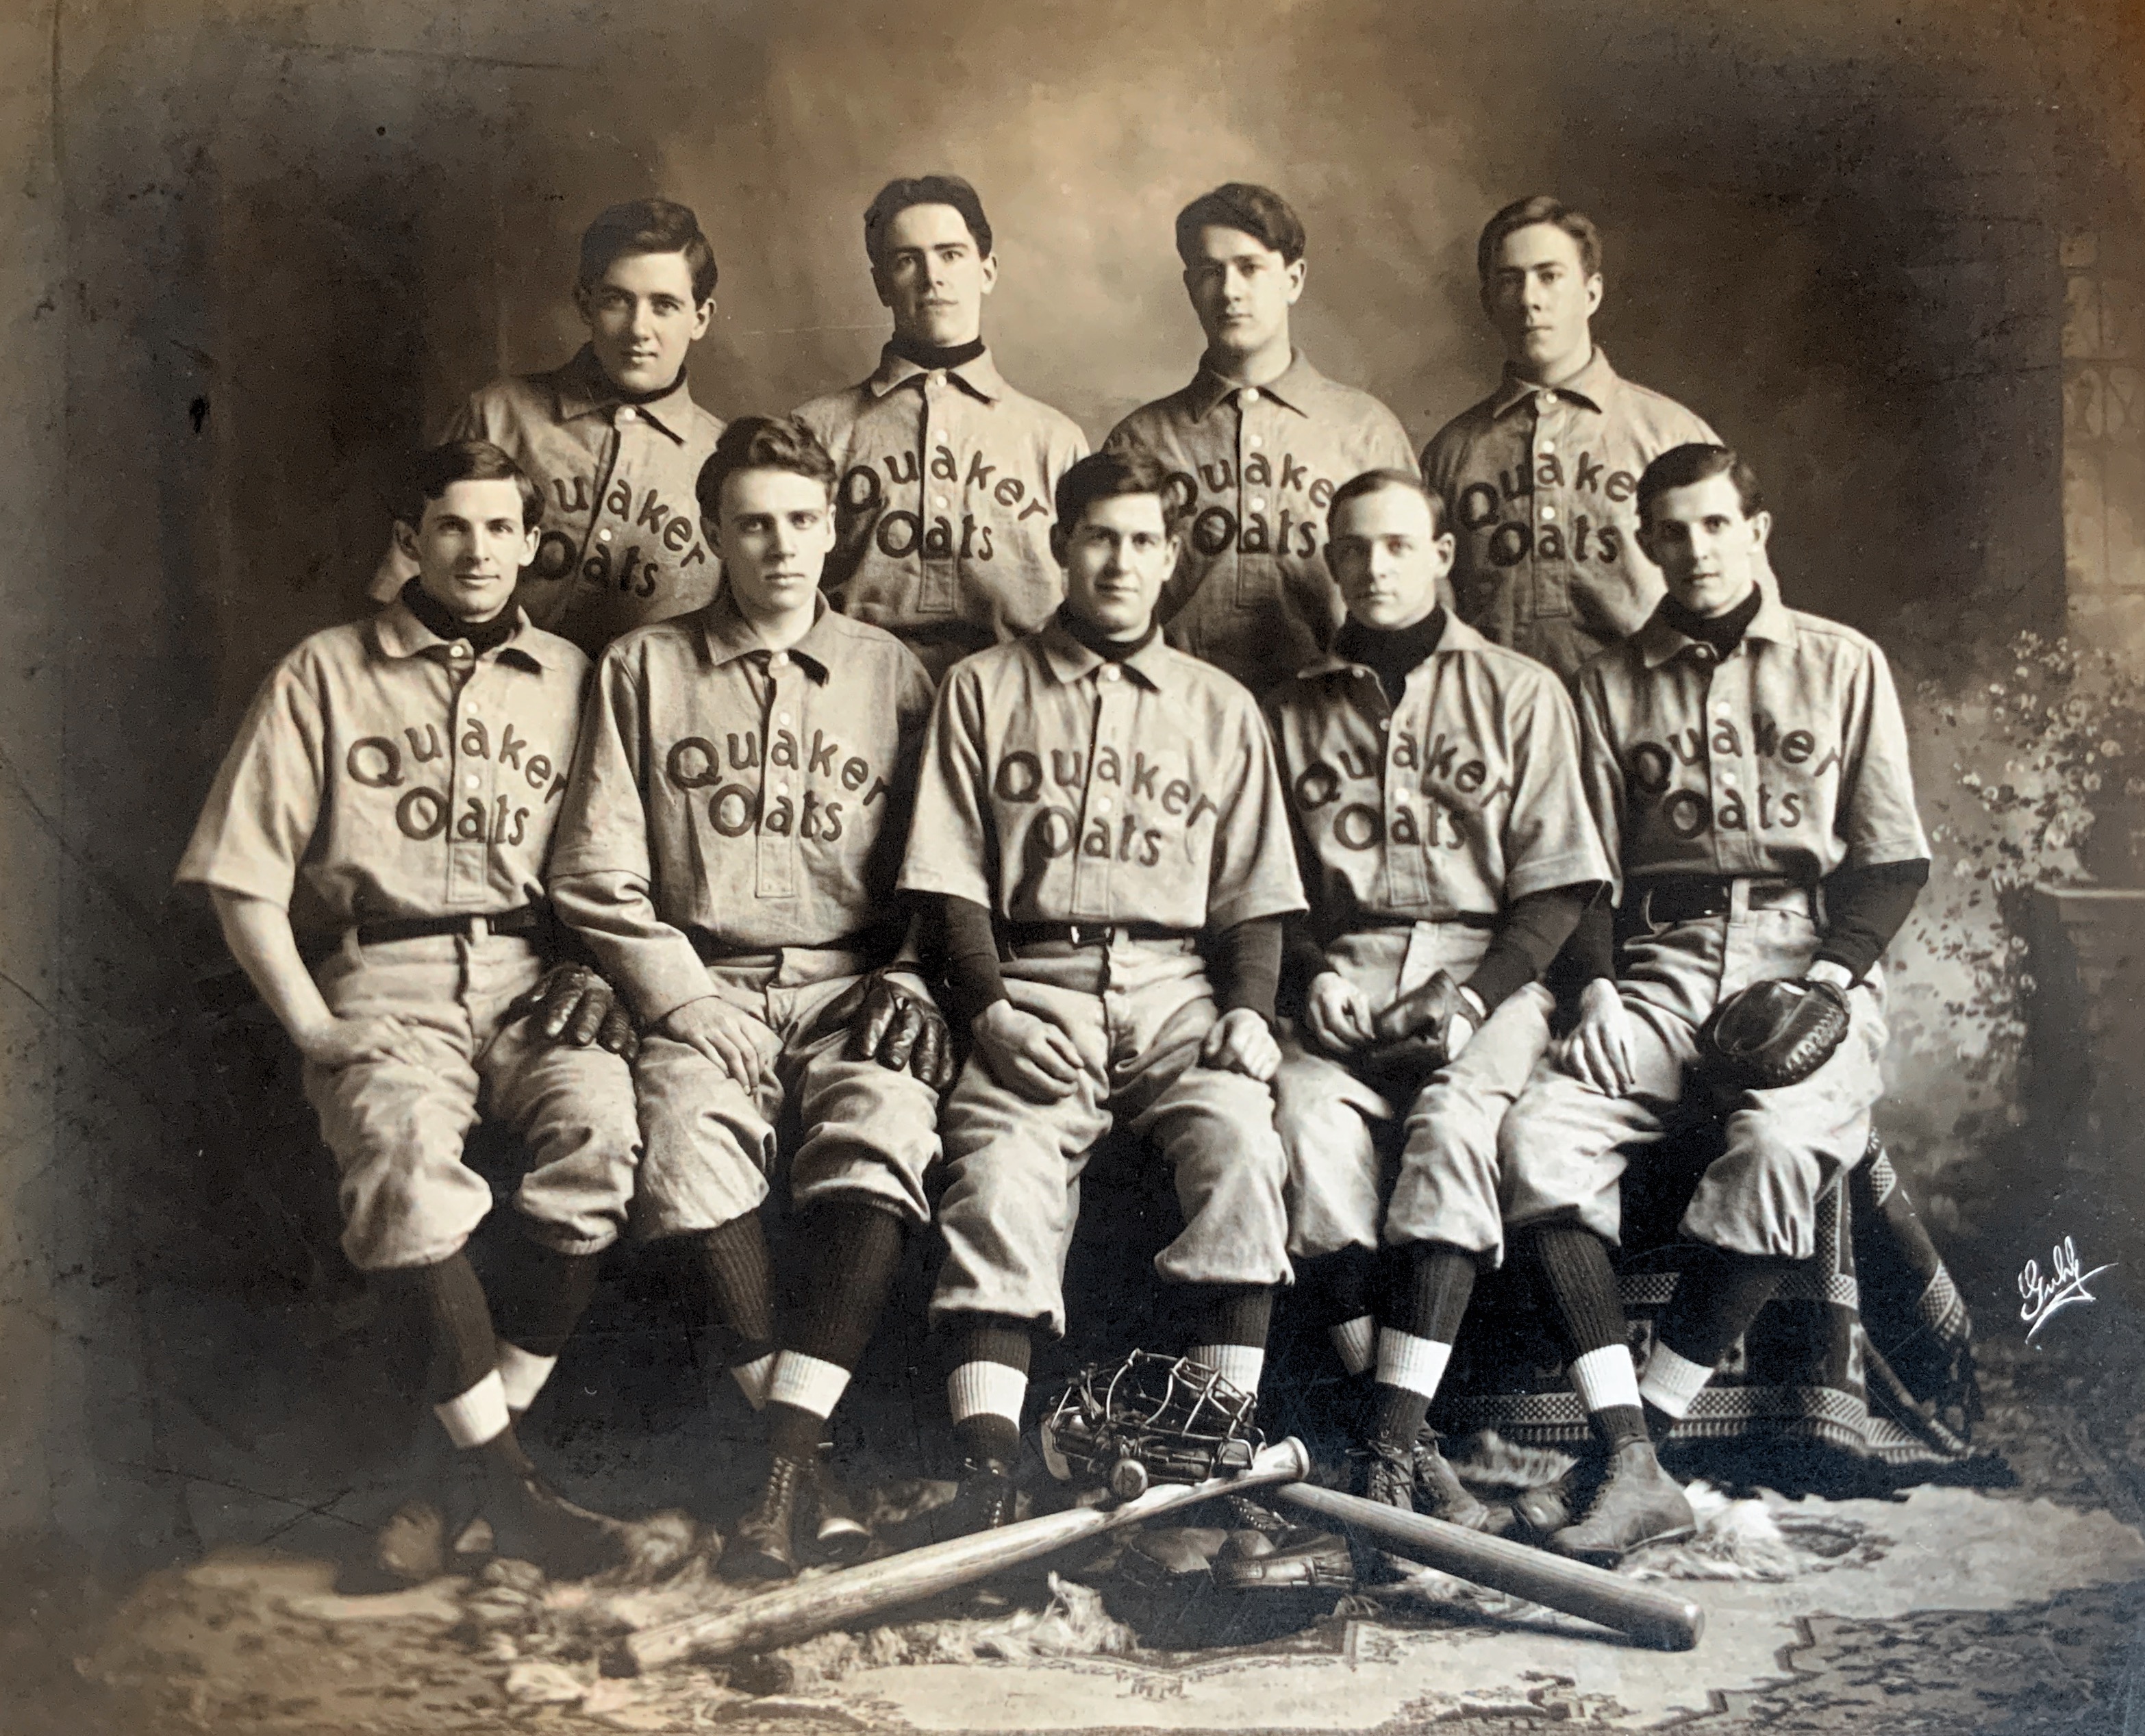 1907 Quaker Oats Baseball team Minor league- Grandpa Winter, “Bud” is in the back row, 3rd from the left.